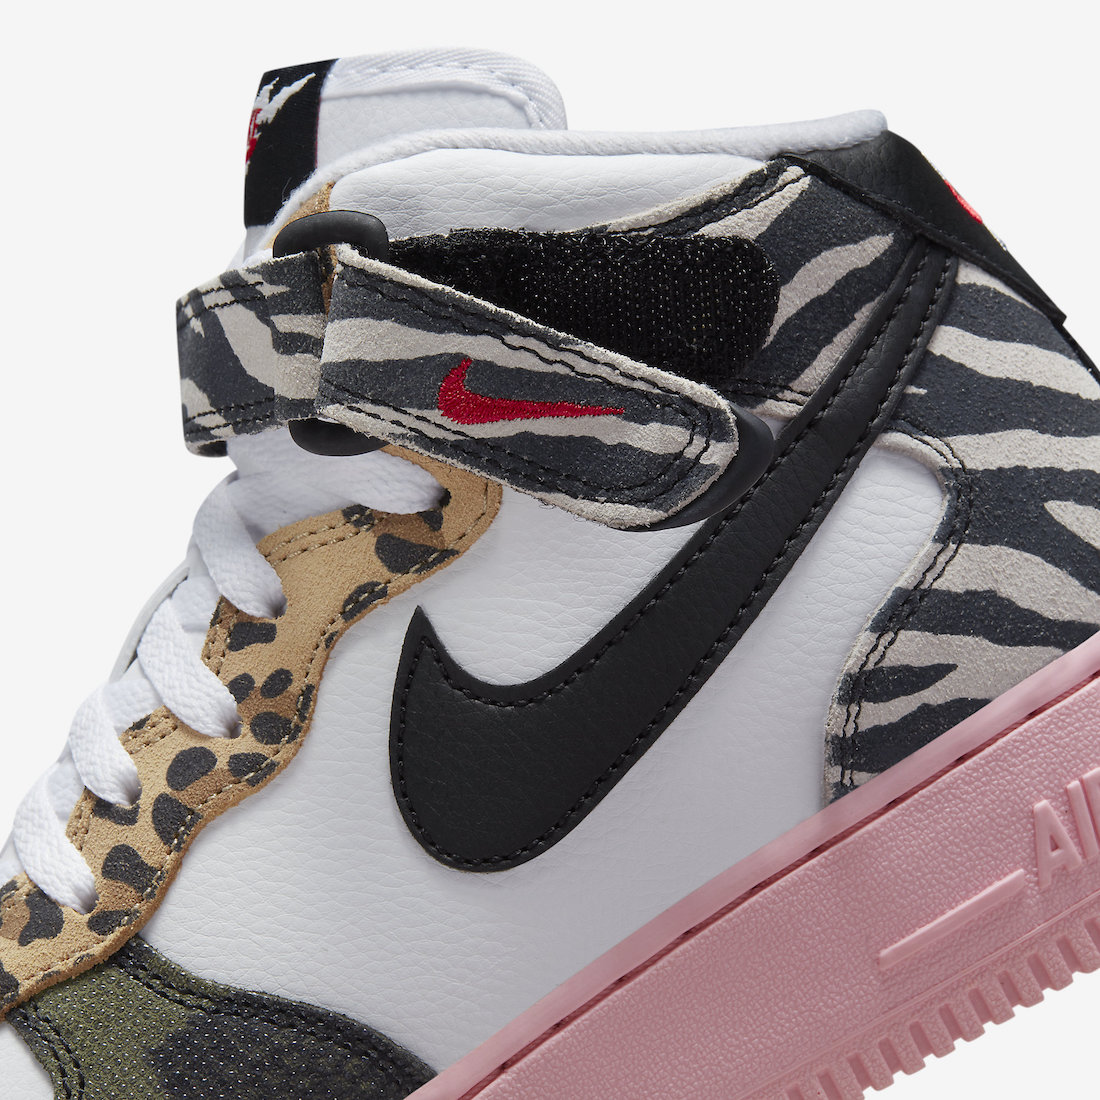 Nike Air Force 1 Mid Animal Instinct DZ4841-100 Release Date